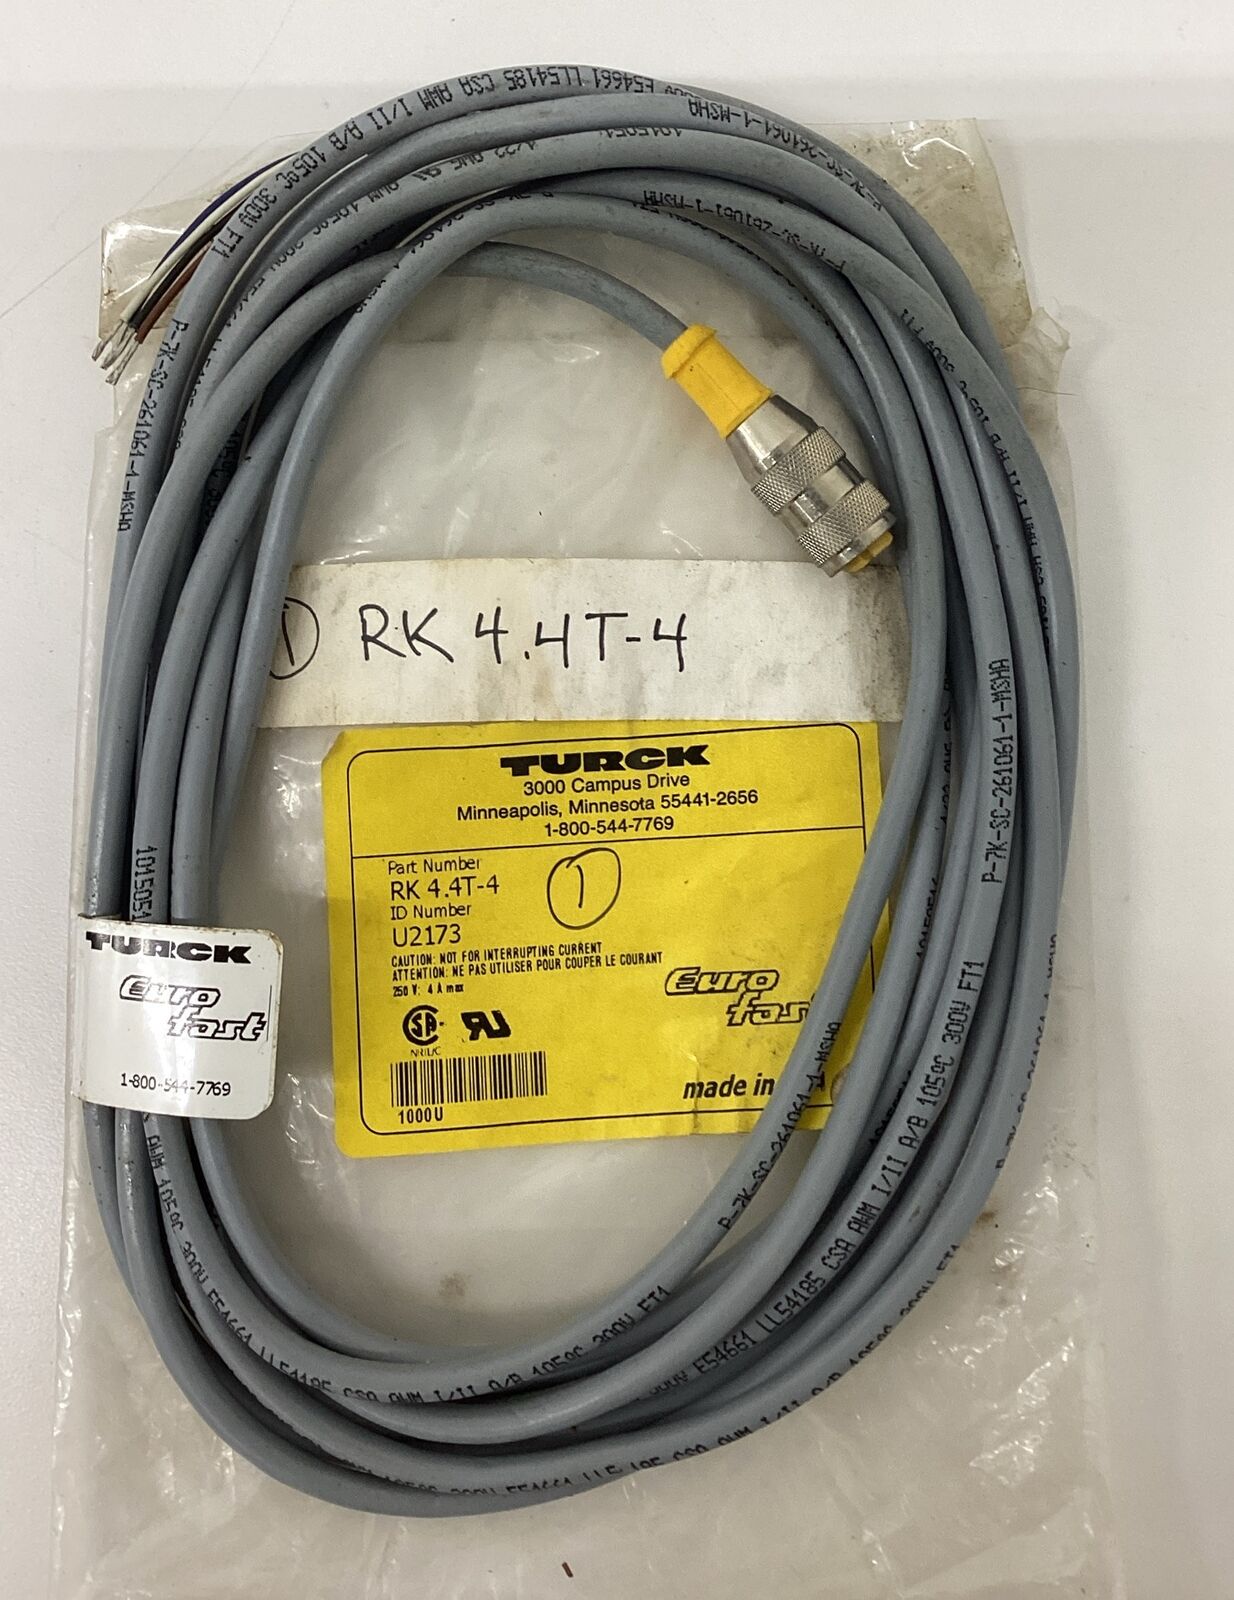 Turck RK4.4T-4 / U2173 M12 4-Wire Straight Single End Cable 4M (RE154)